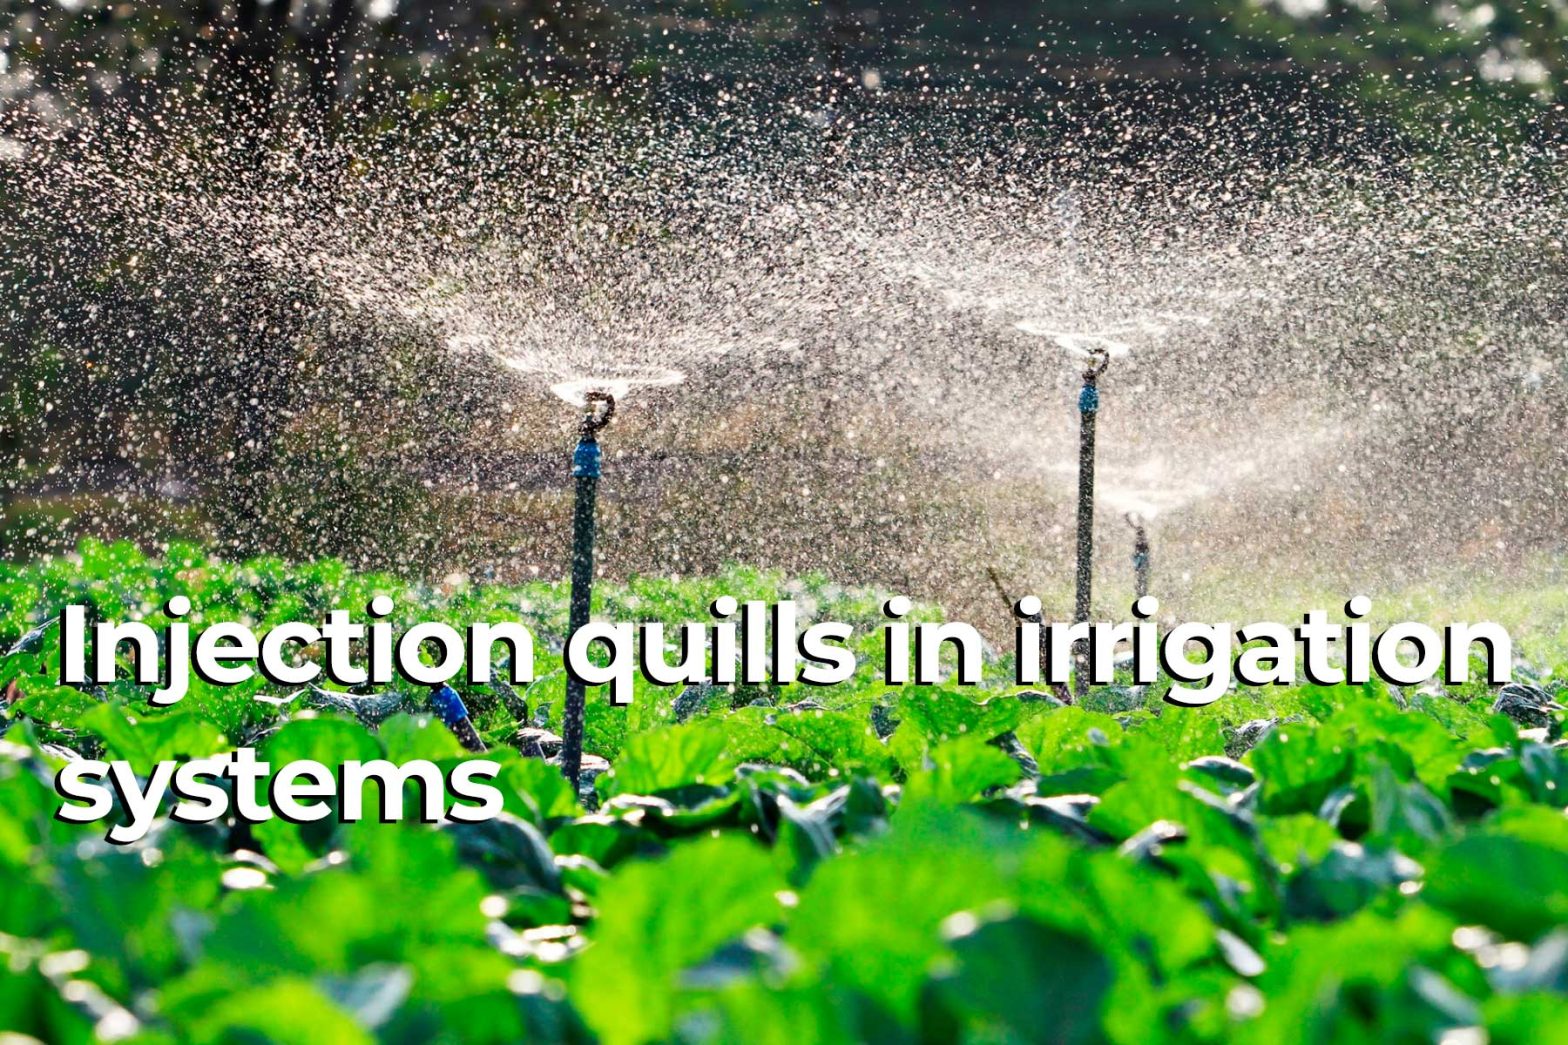 Injection quills for irrigation systems